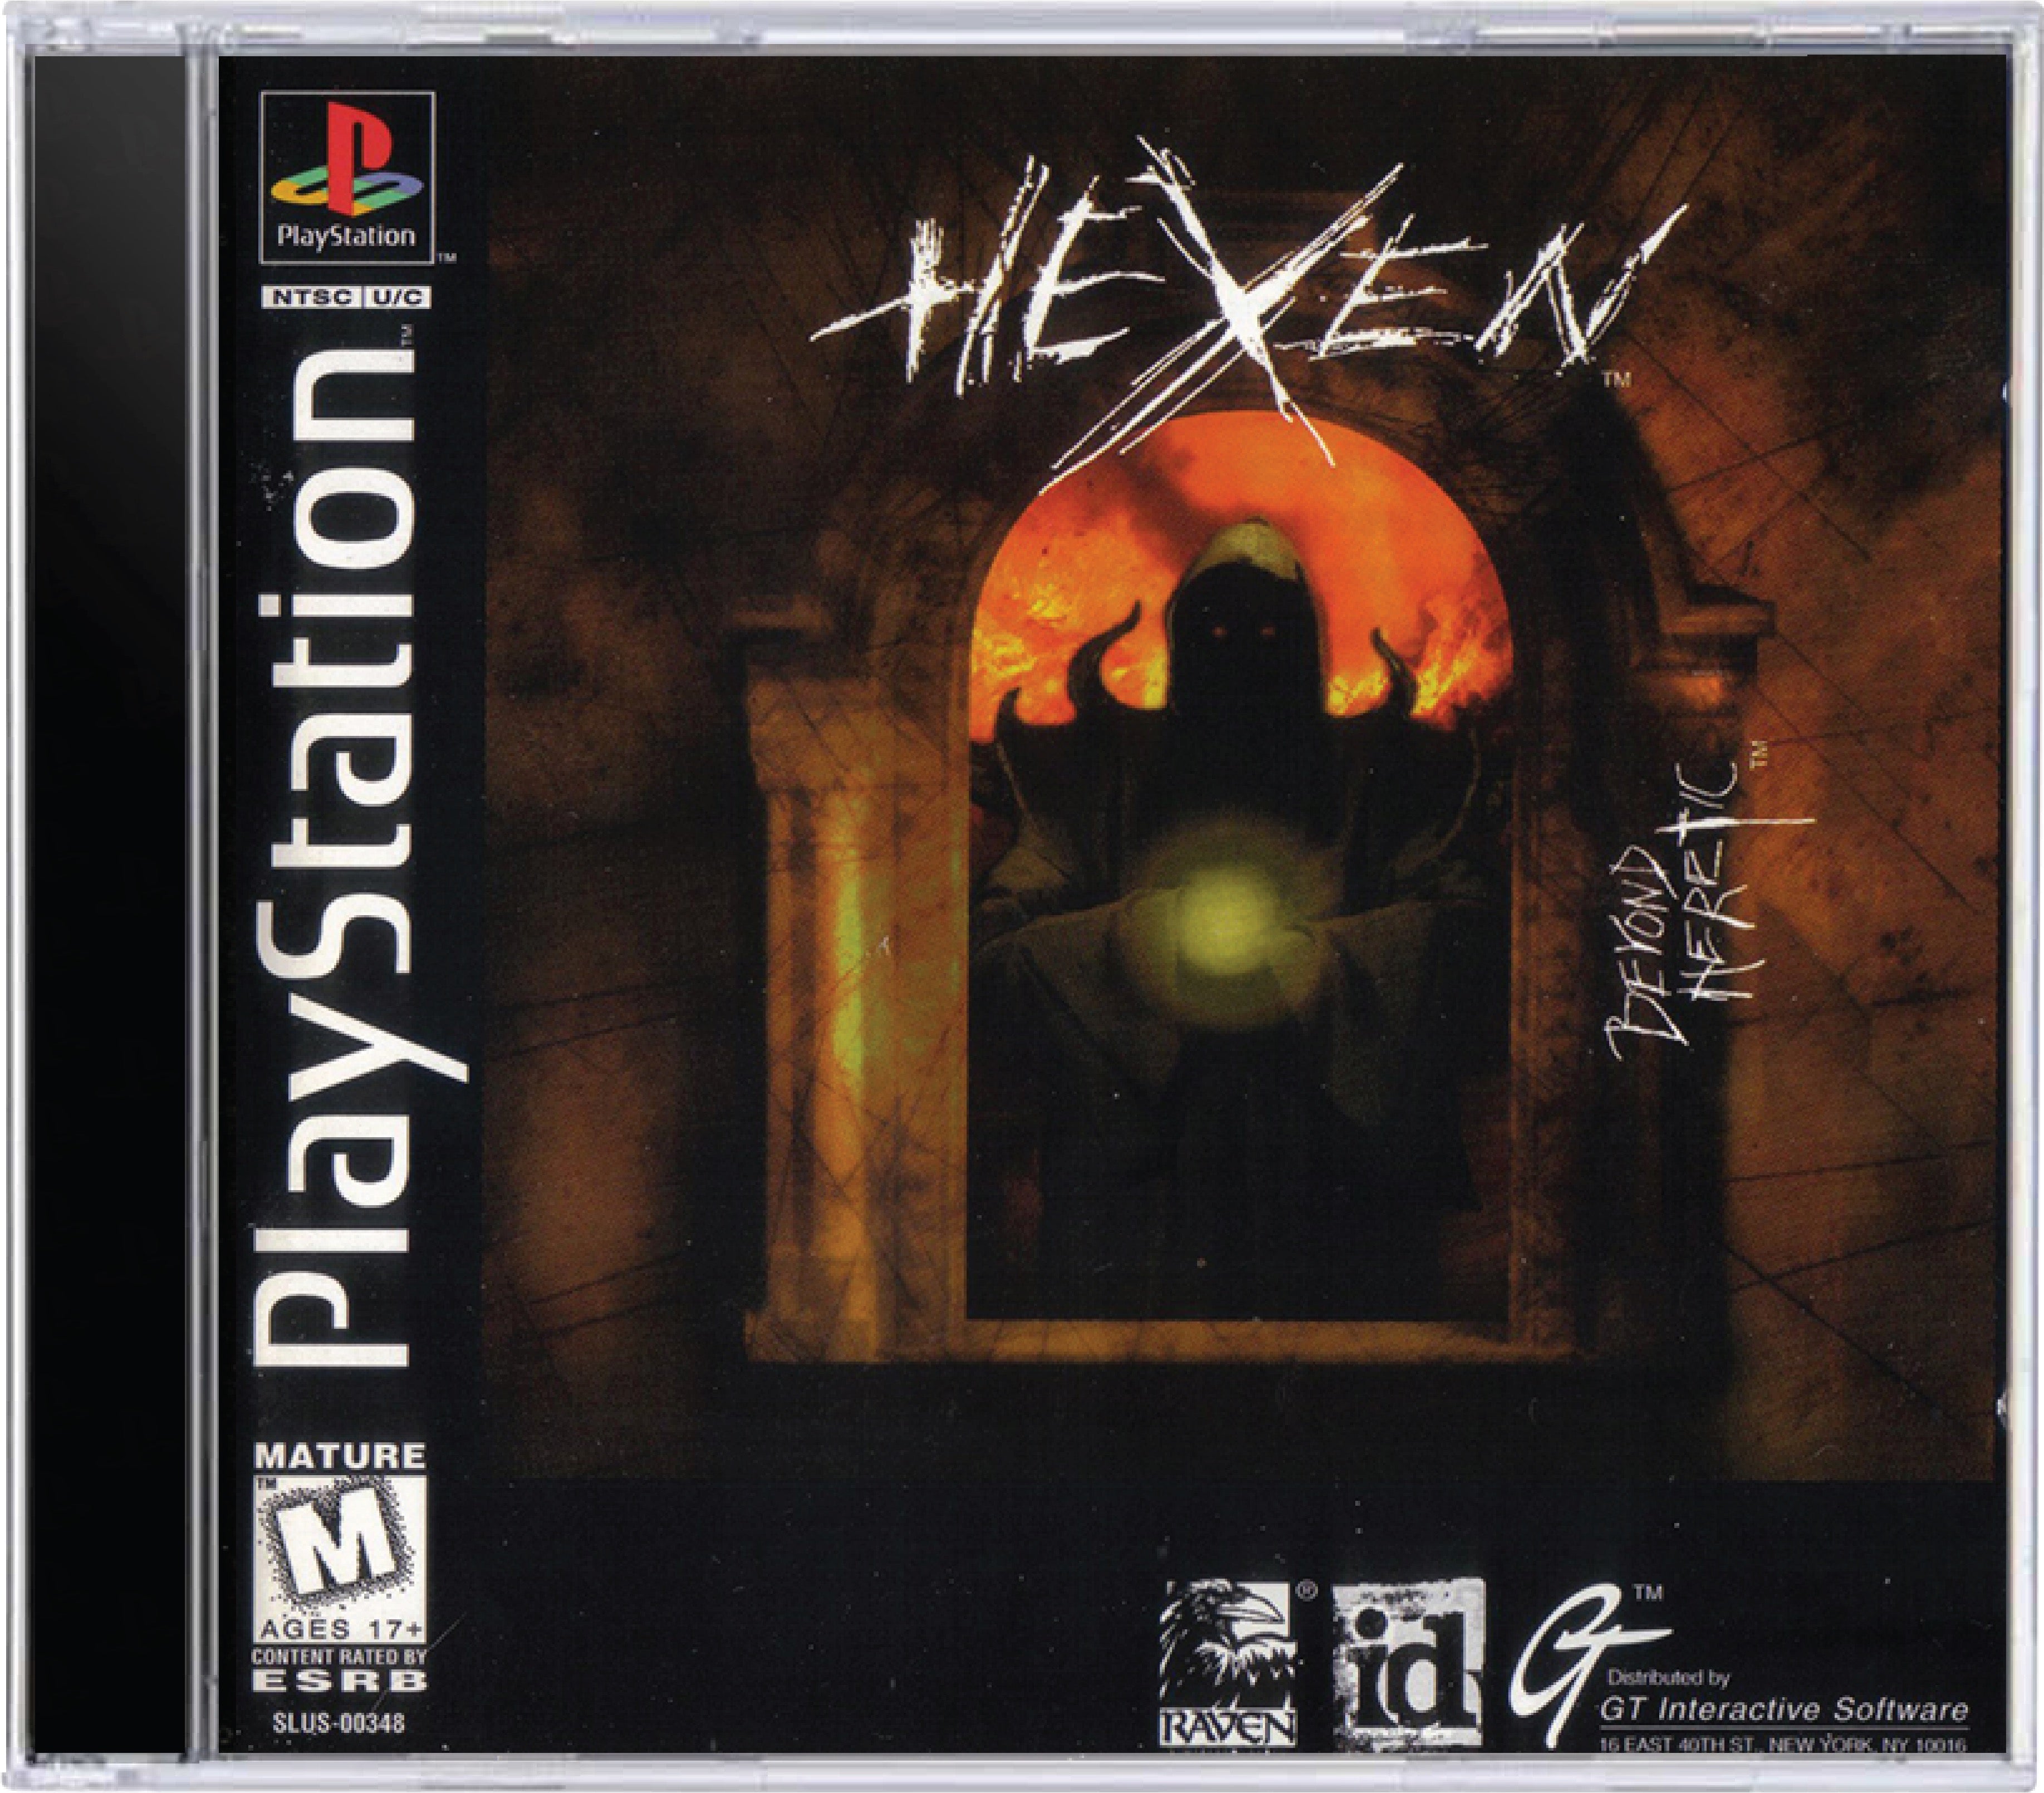 Hexen Cover Art and Product Photo